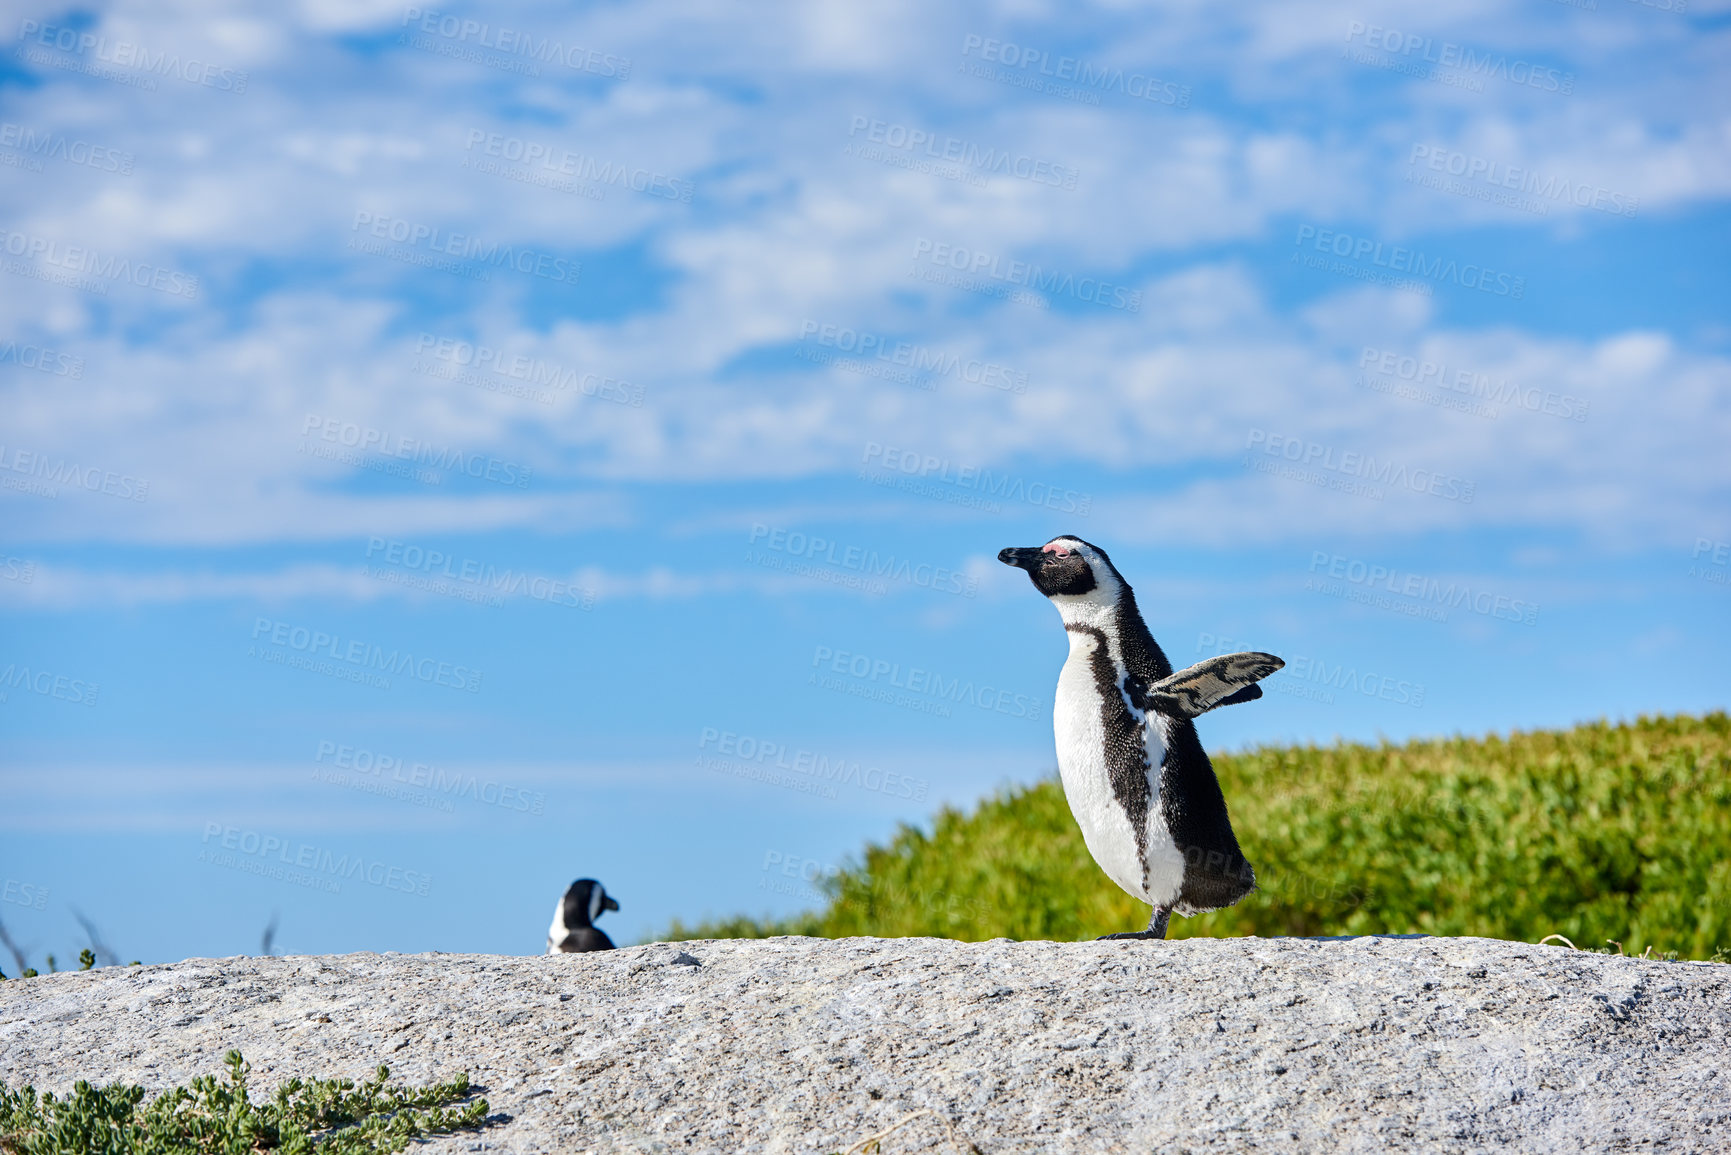 Buy stock photo Penguin on a rock on blue cloudy sky with copy space. One flightless bird on a boulder. Endangered black footed or Cape penguin species standing with open wings or flippers in Cape Town, South Africa